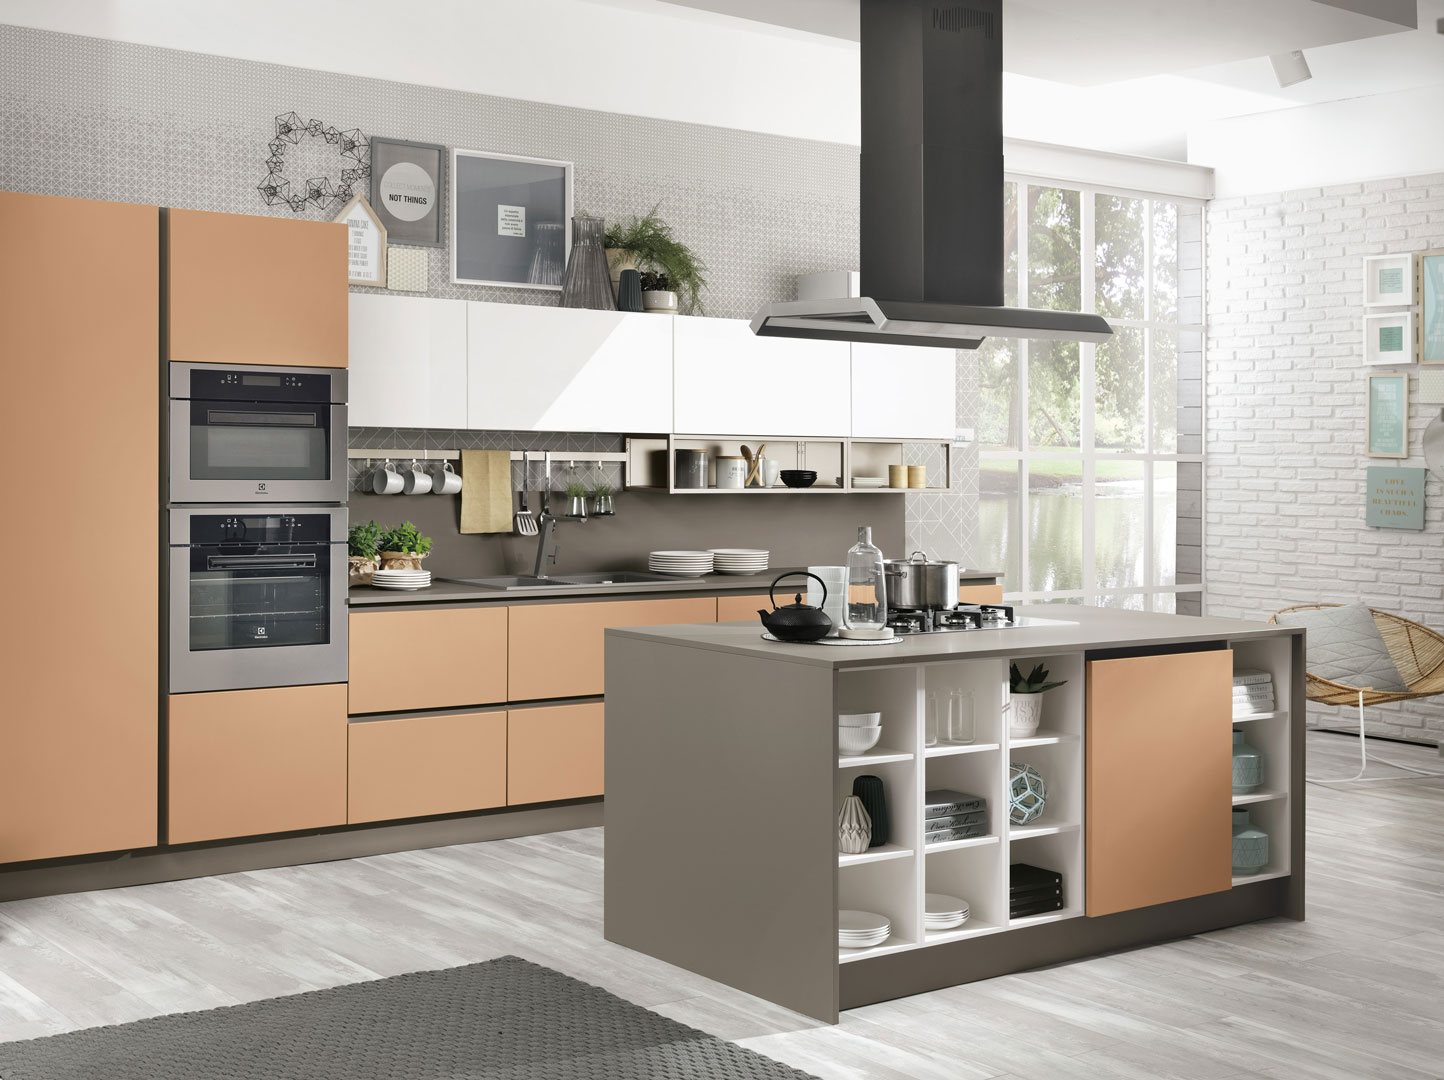 Pros and Cons of Modular Kitchen Design - A Comprehensive Guide